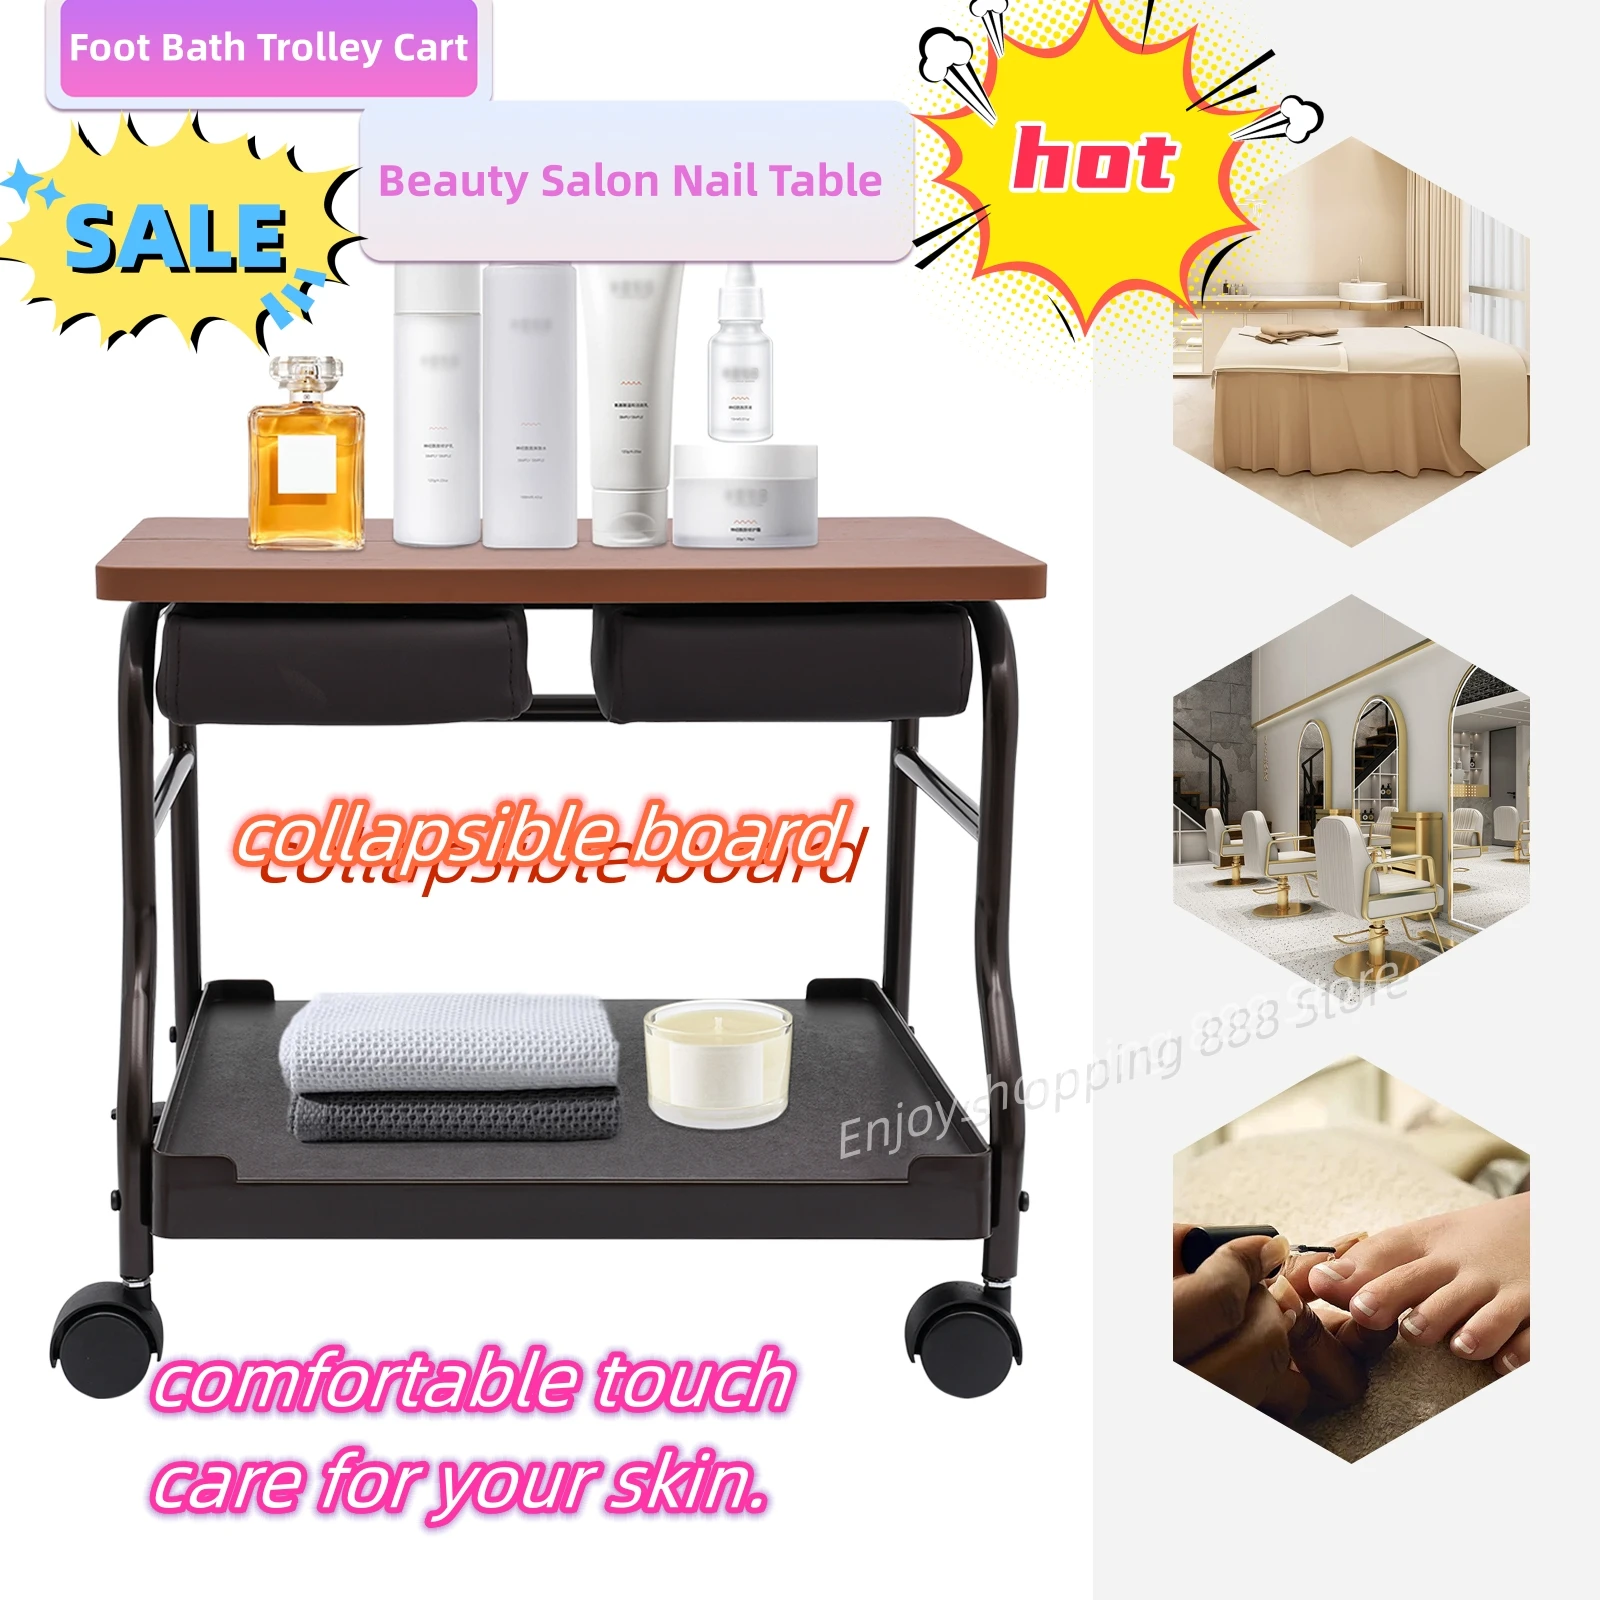 Foot Bath Trolley Cart Beauty Salon Nail Table with Wheels & Storage Rack for Massage Rest Pedicure Load 39.7lbs retro beauty salon stroller european hairdressing tattoo tattoo barber shop three layer with drawer tool car rack shelf